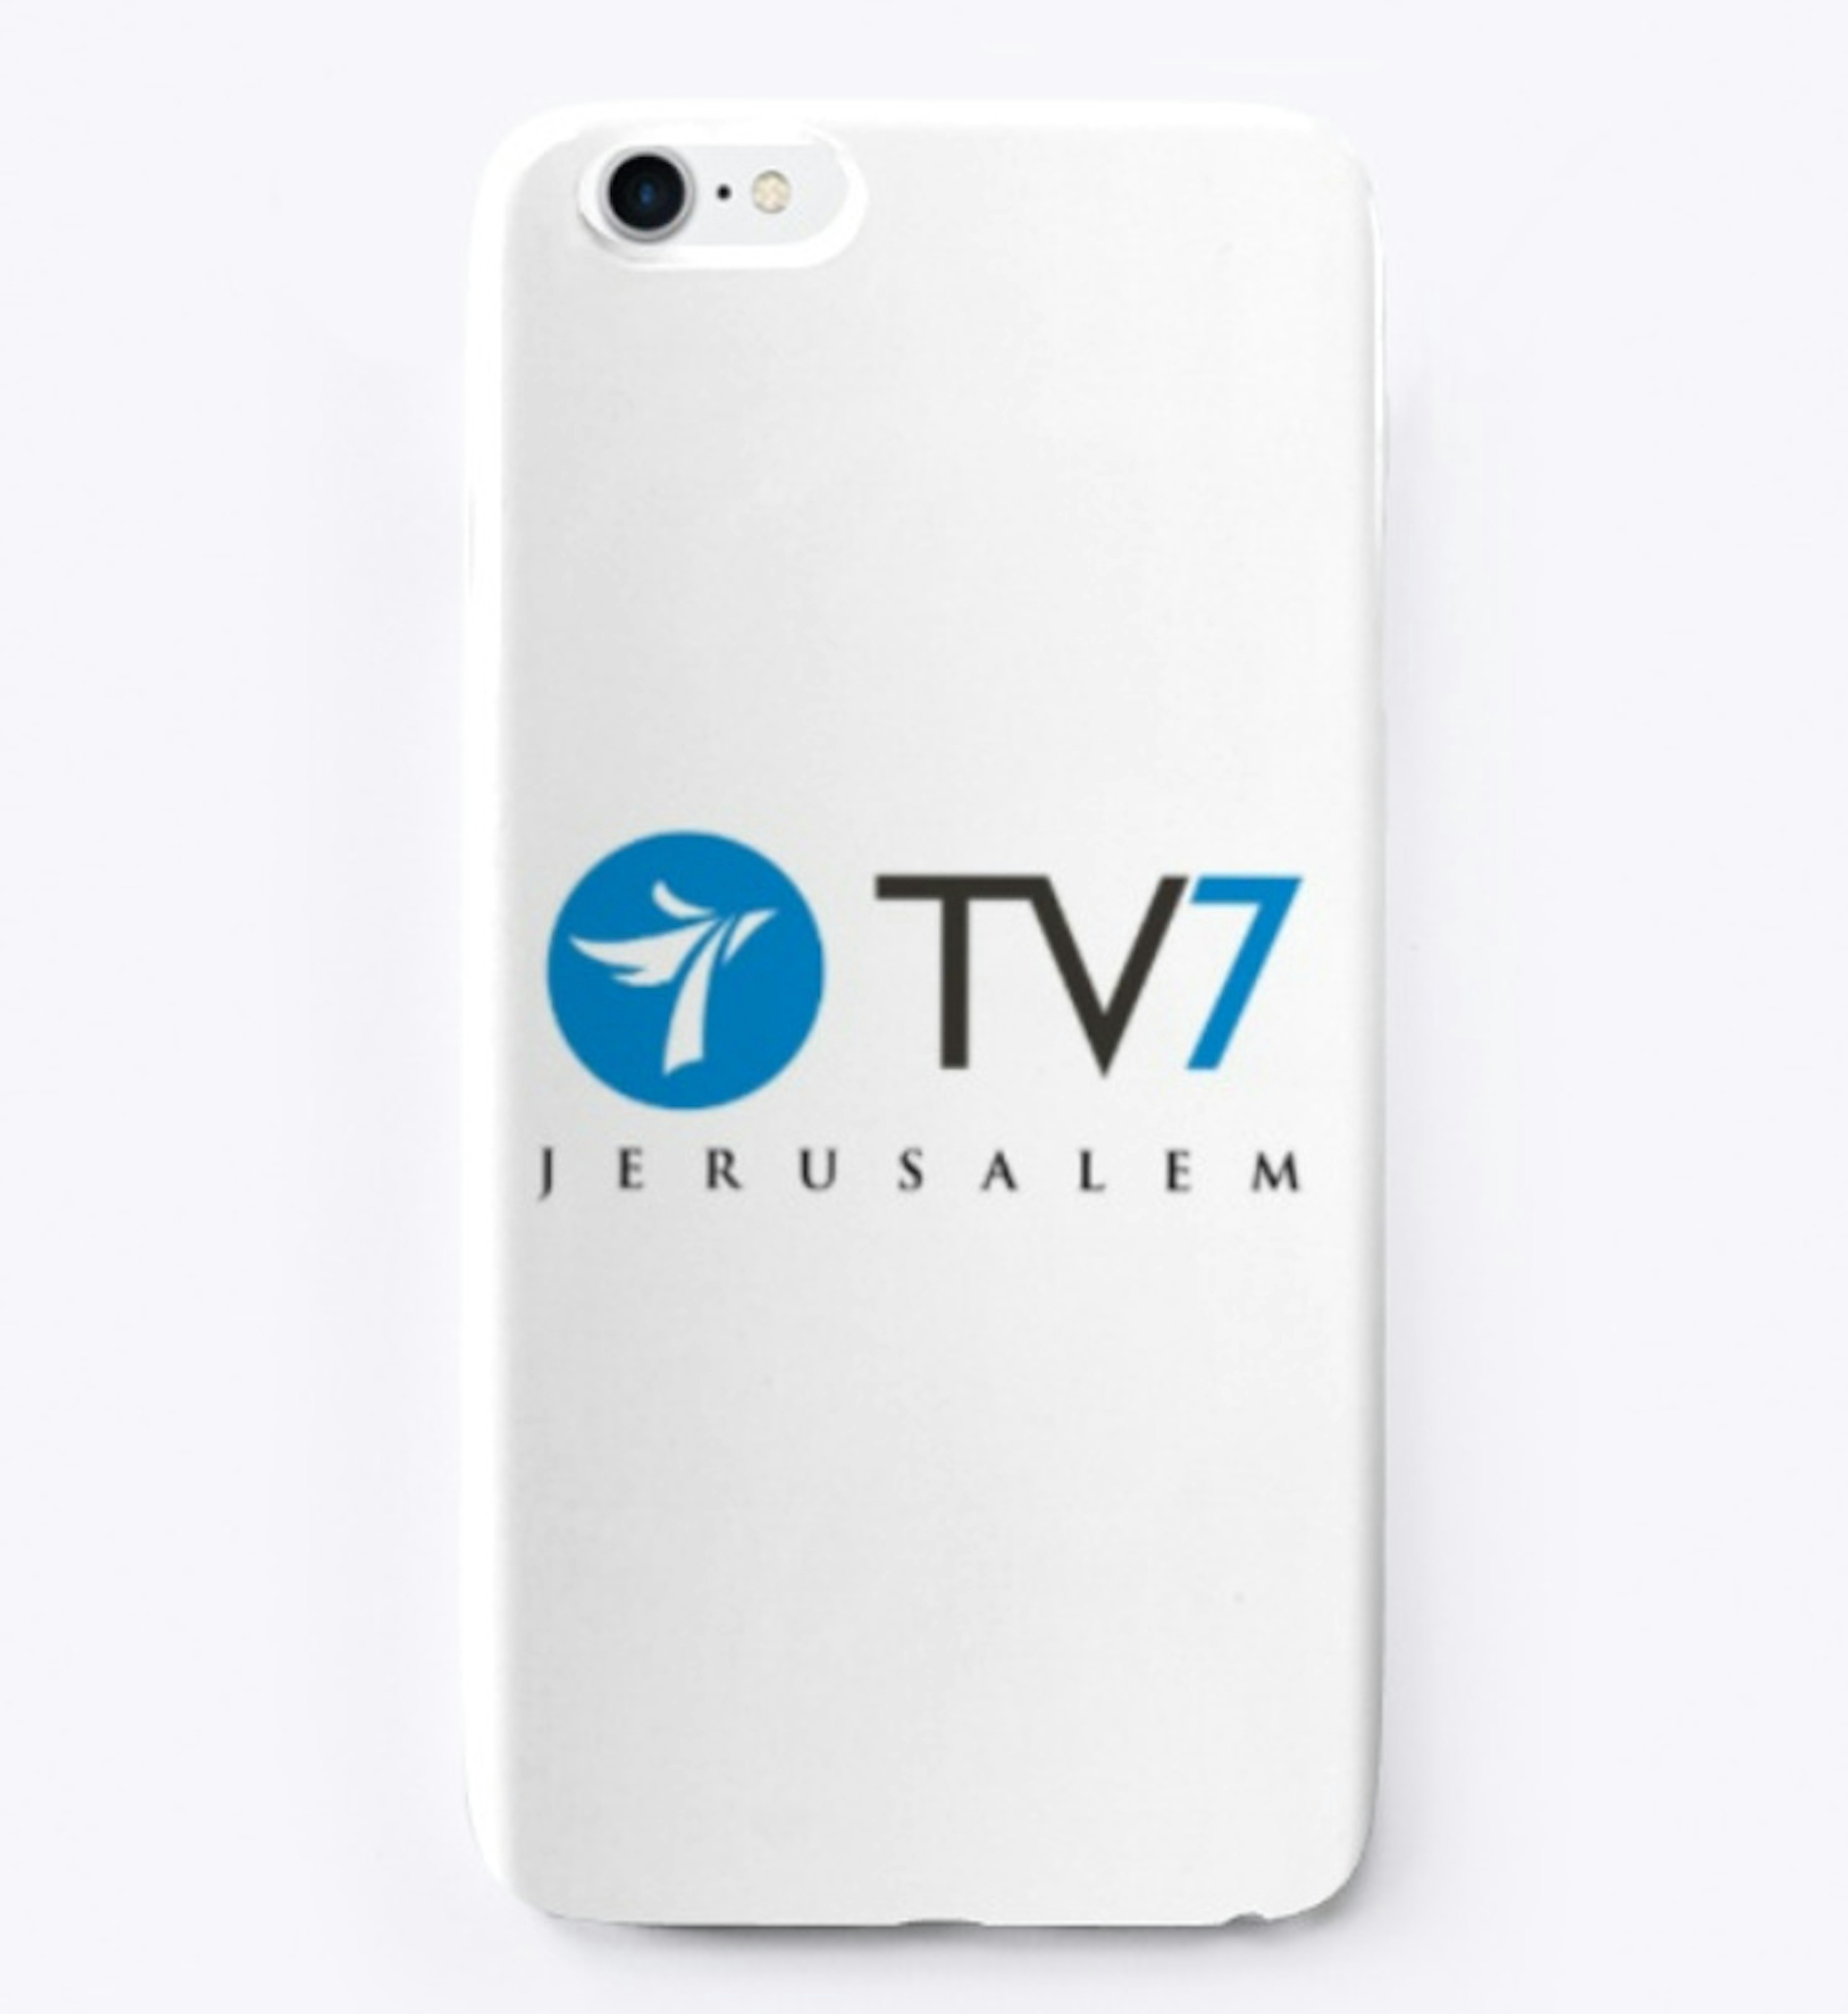 TV7 Israel News iPhone case (all types) 